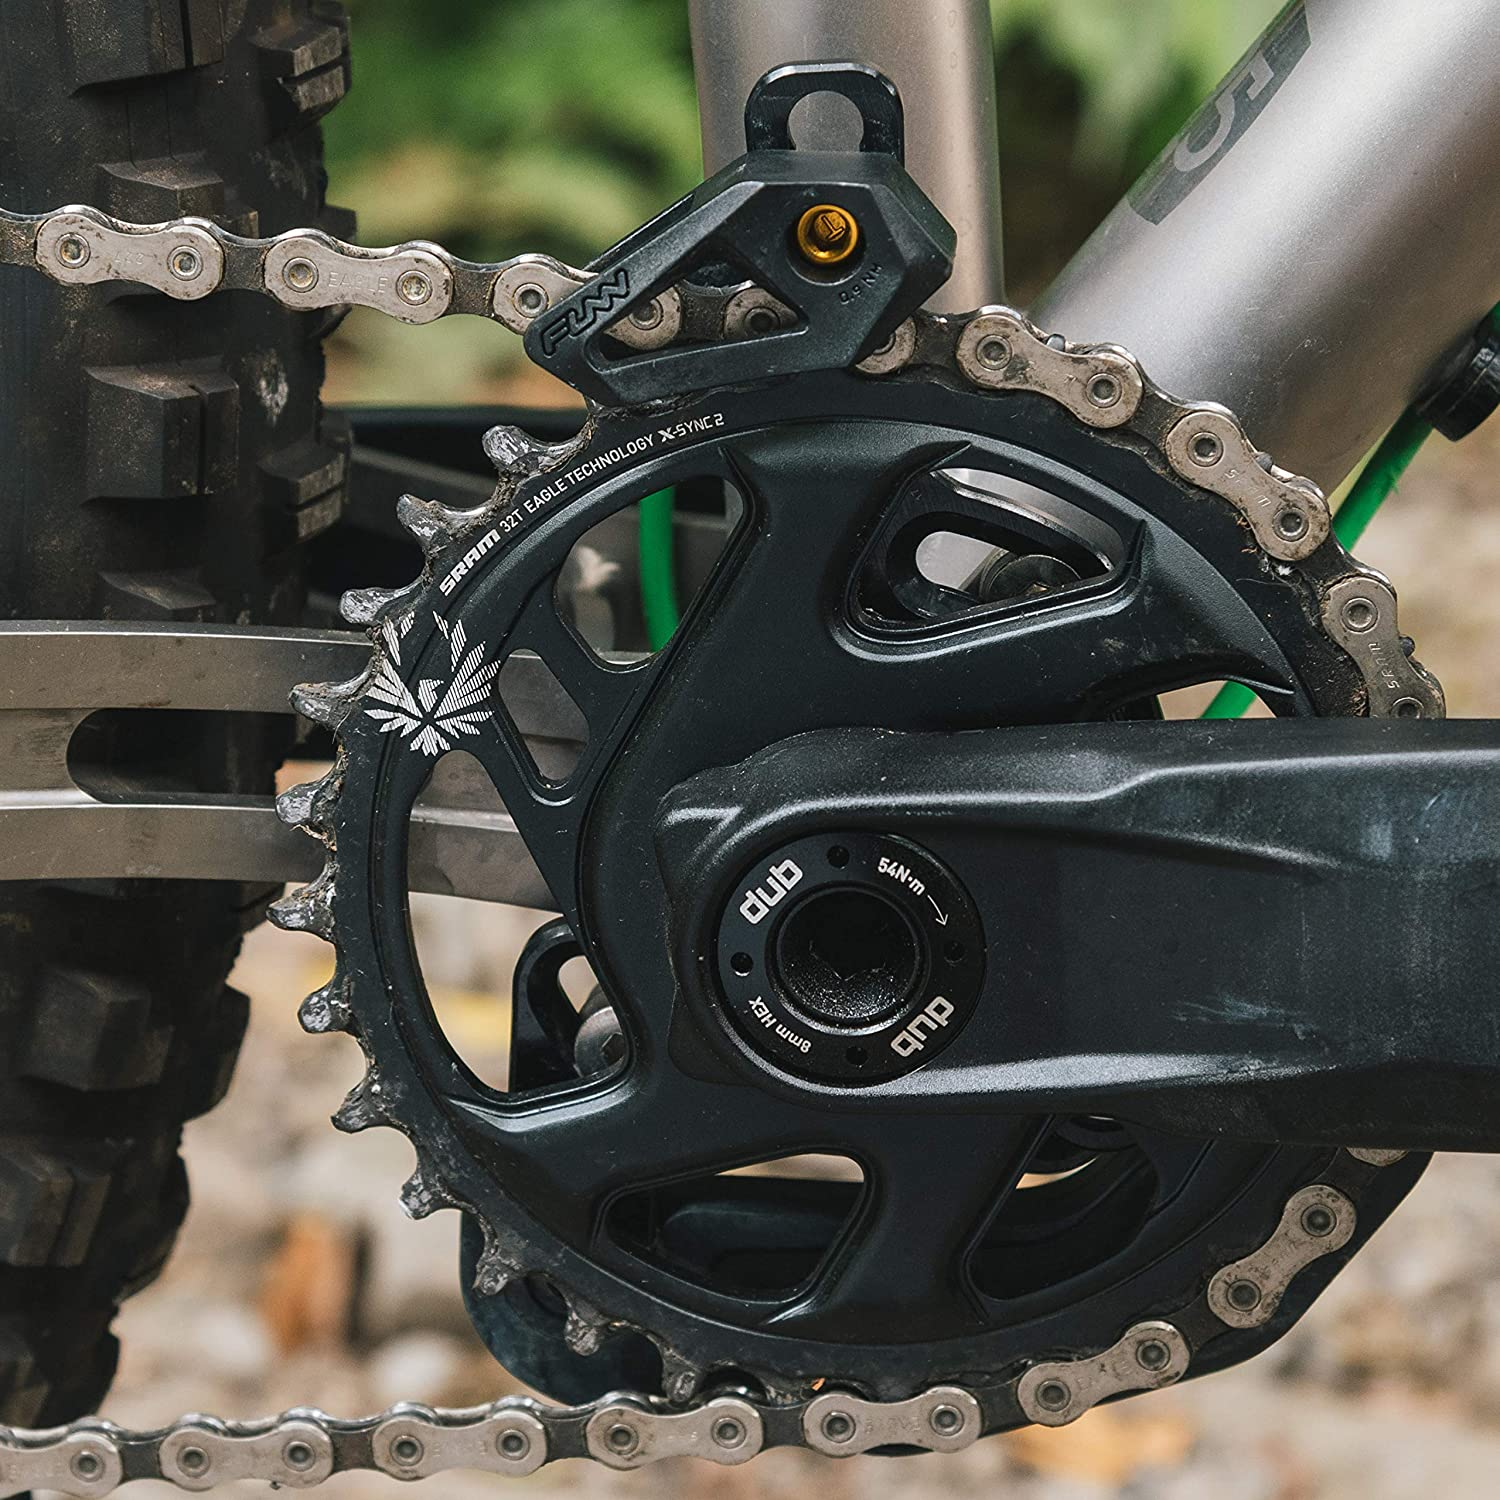 Make sure that you align the chain guide with the crank of your mountain bike.